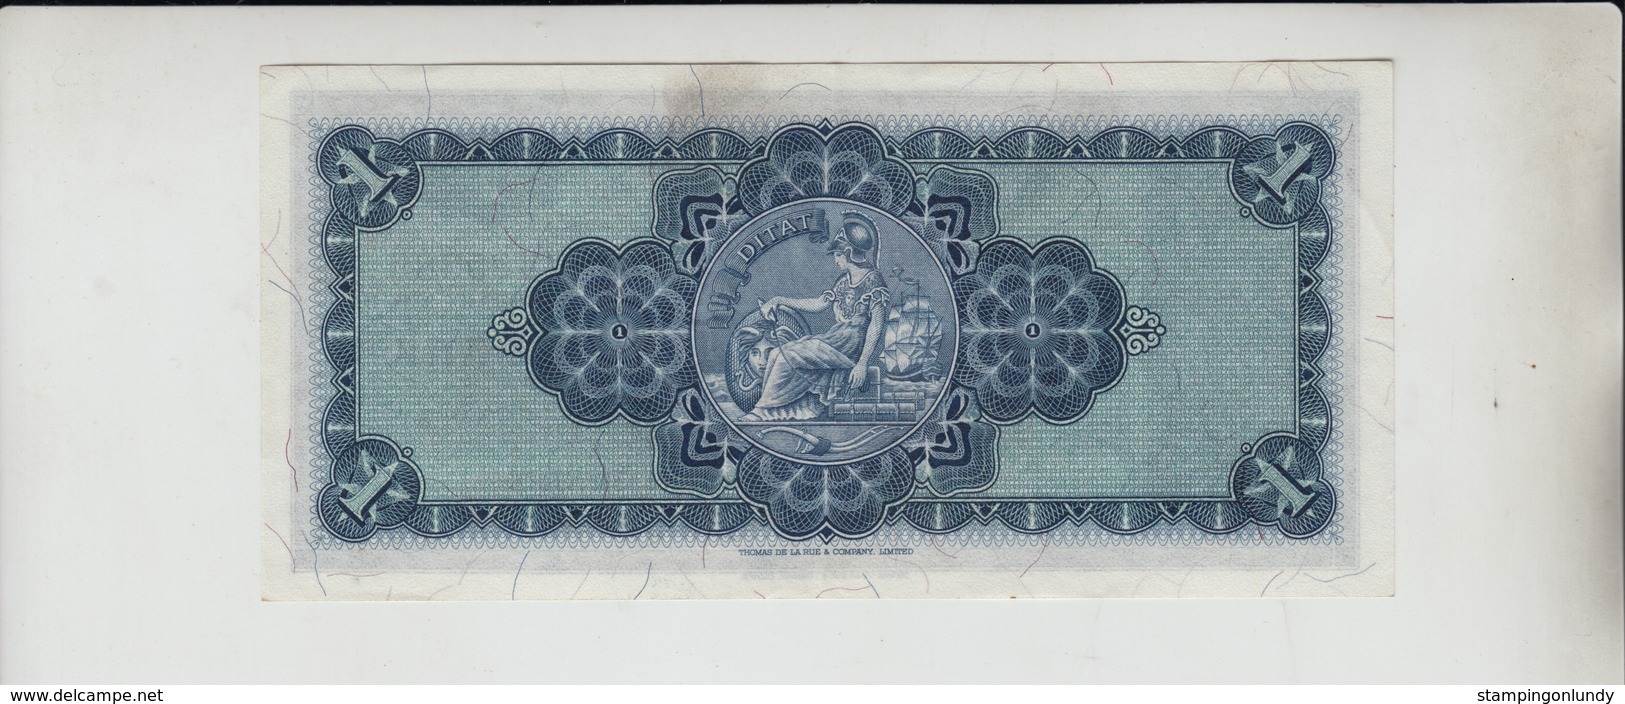 AB438. The British Linen Bank £1 Banknote 25th January 1966 #N/4 485989 FREE UK P+P - 1 Pound